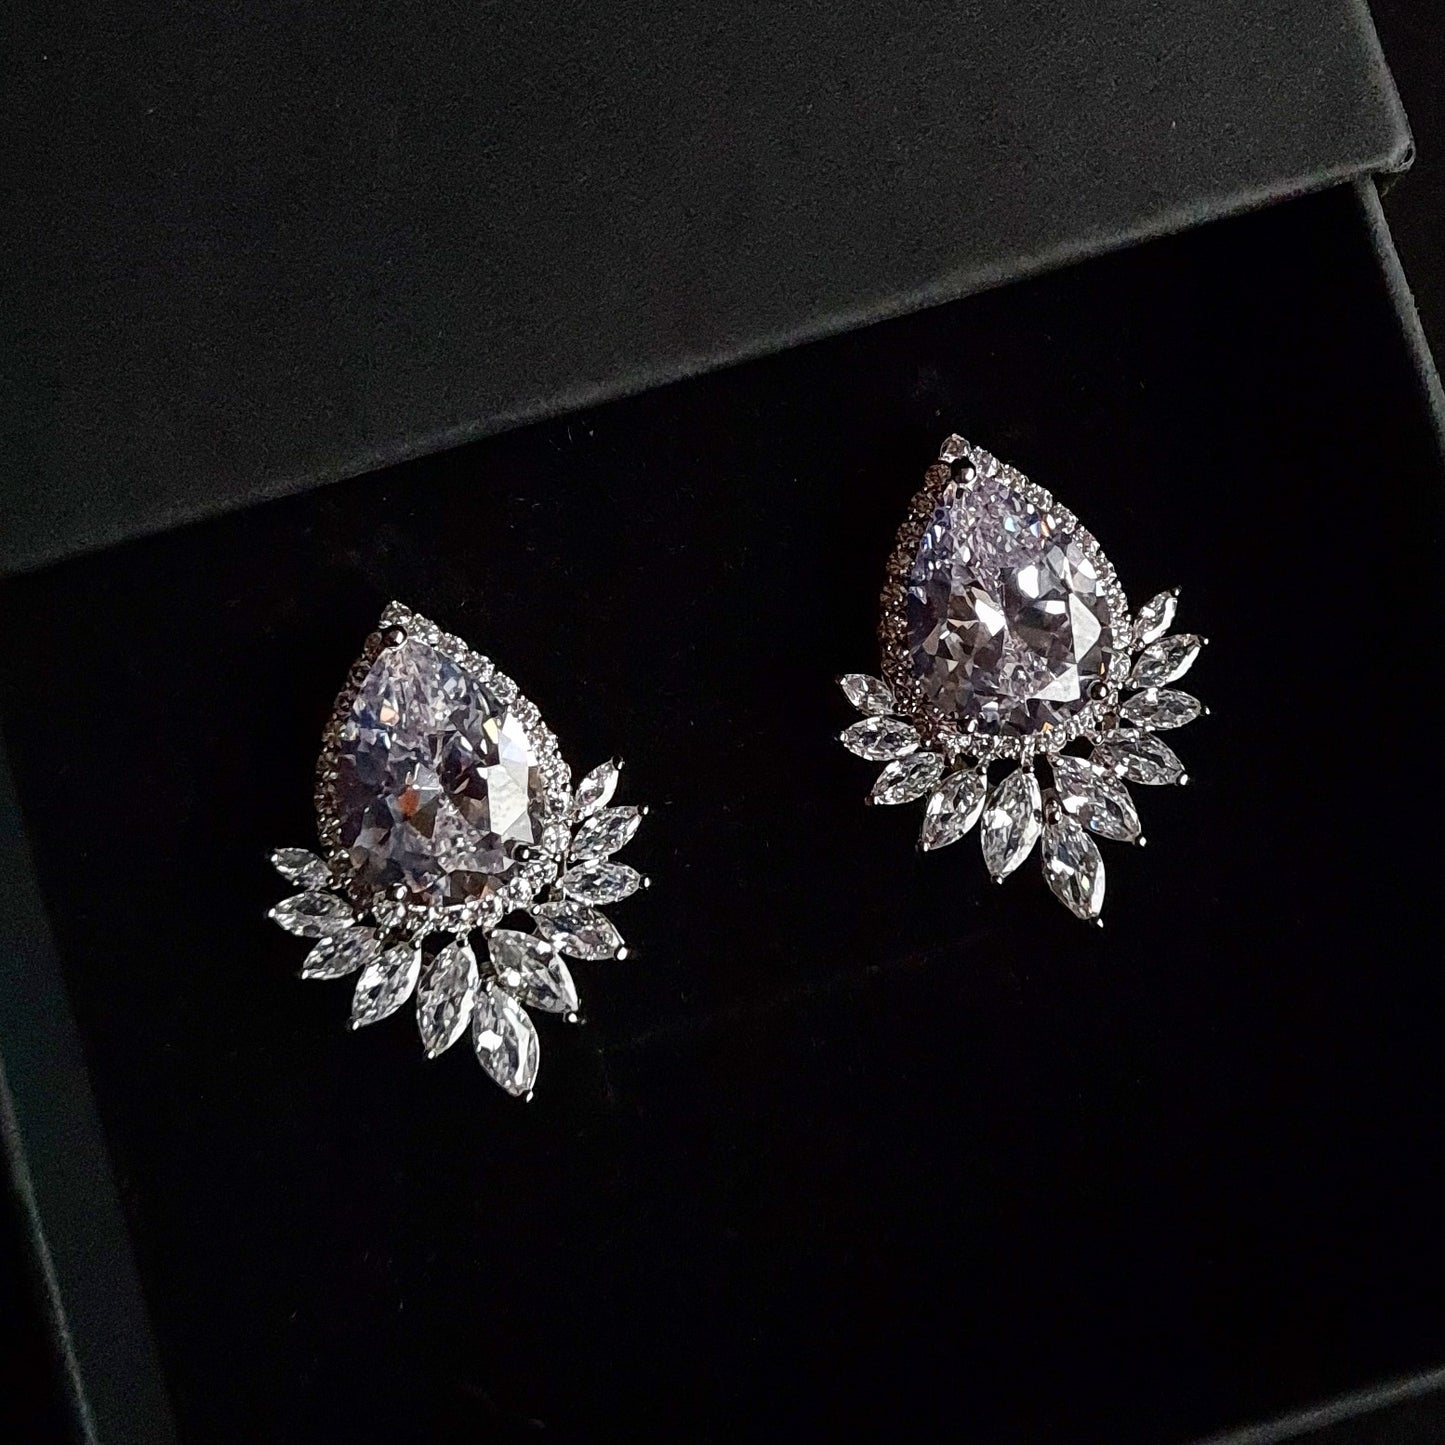 A pair of silver earrings with a large diamond in the center and a cluster of smaller diamonds around it. The earrings are sitting inside a black jewelry box.